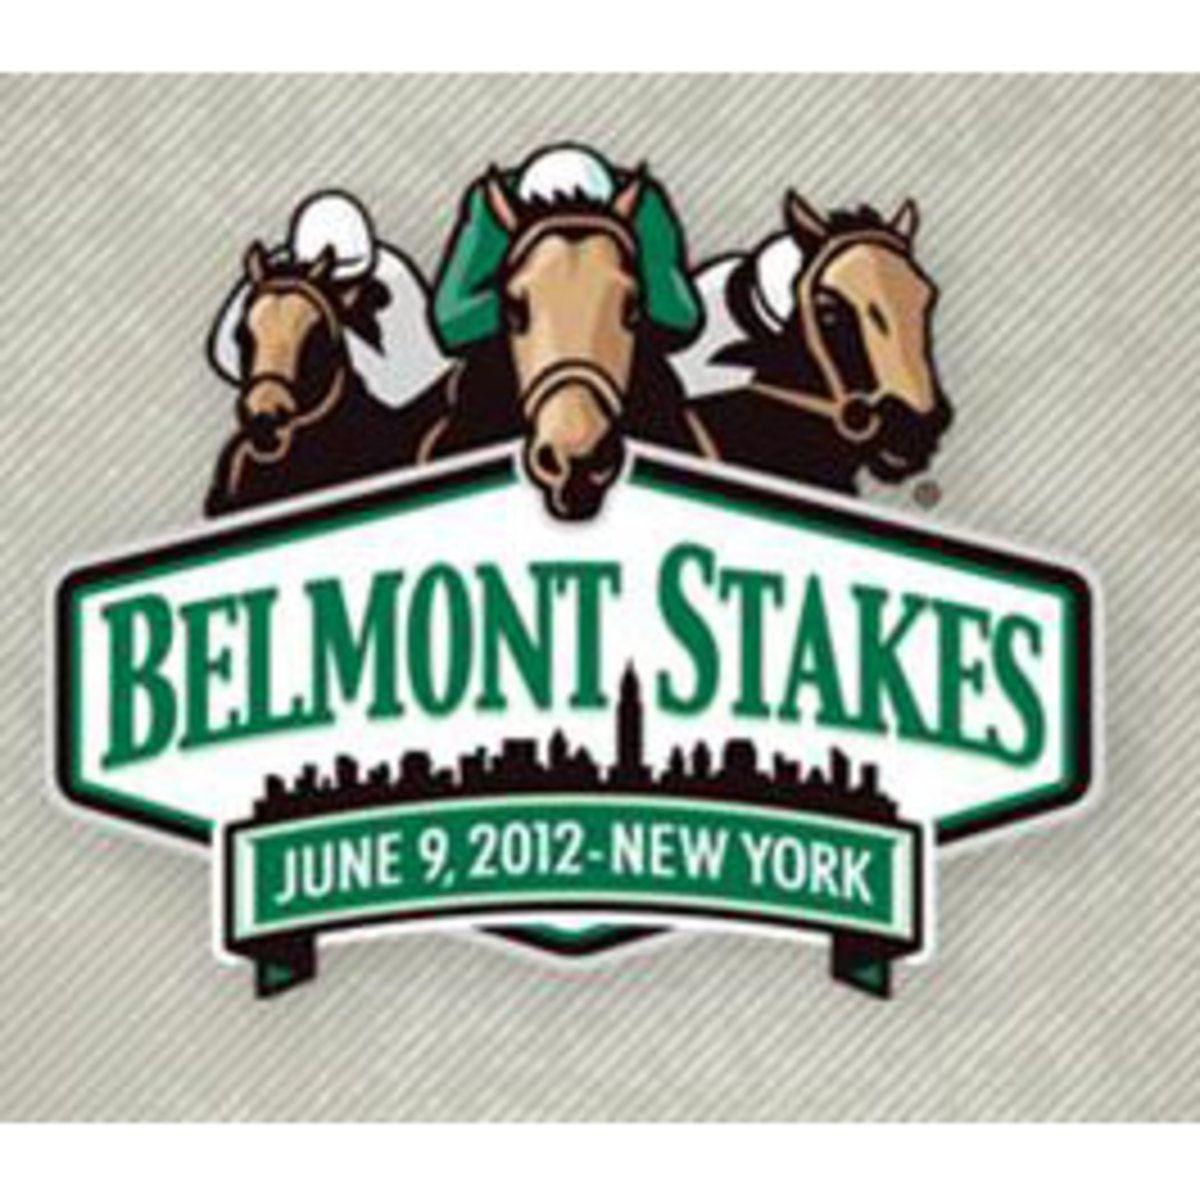 Belmont Logo - The 2012 Belmont - Expert advice on horse care and horse riding